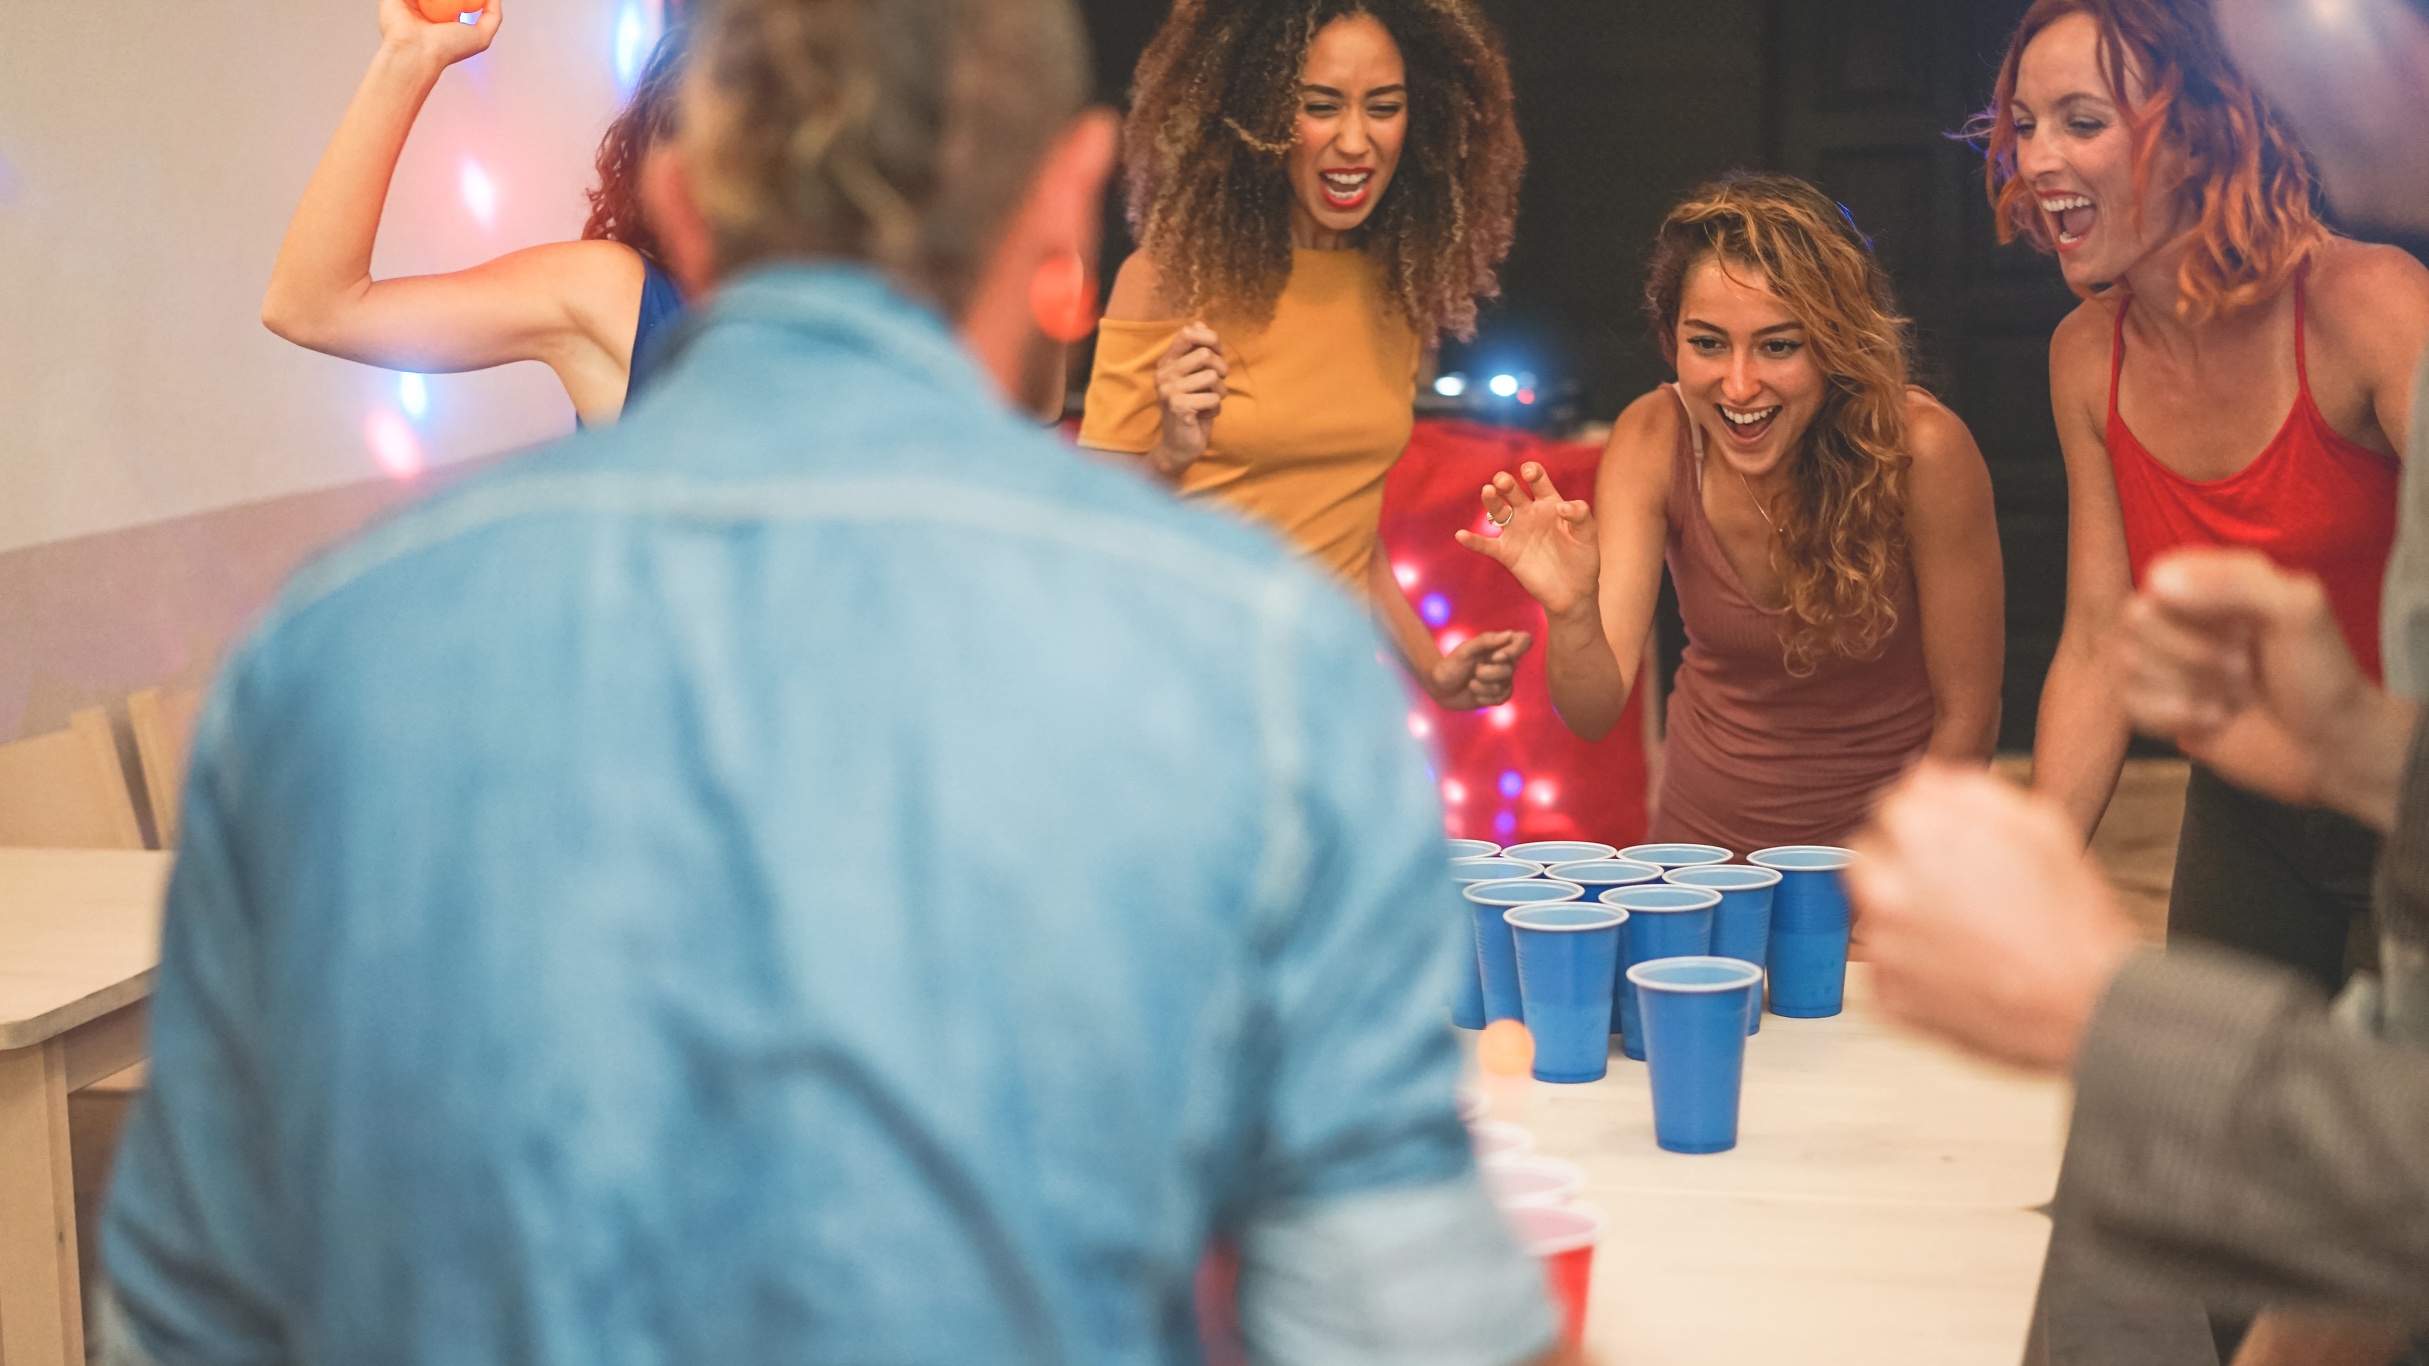 women playing beer pong and drinking